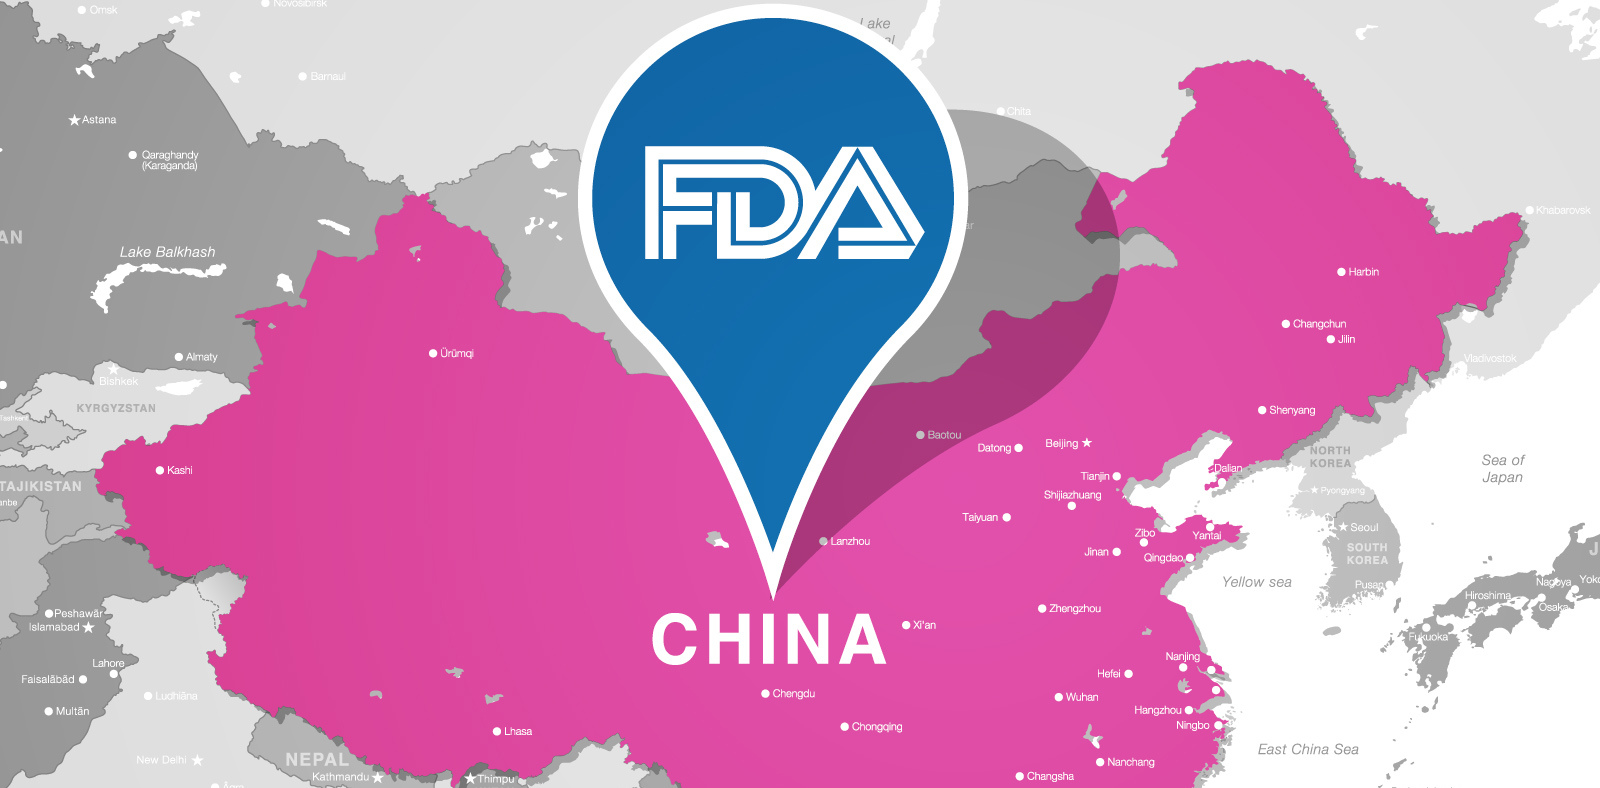 Expedite Reporting of Adverse Events to China FDA